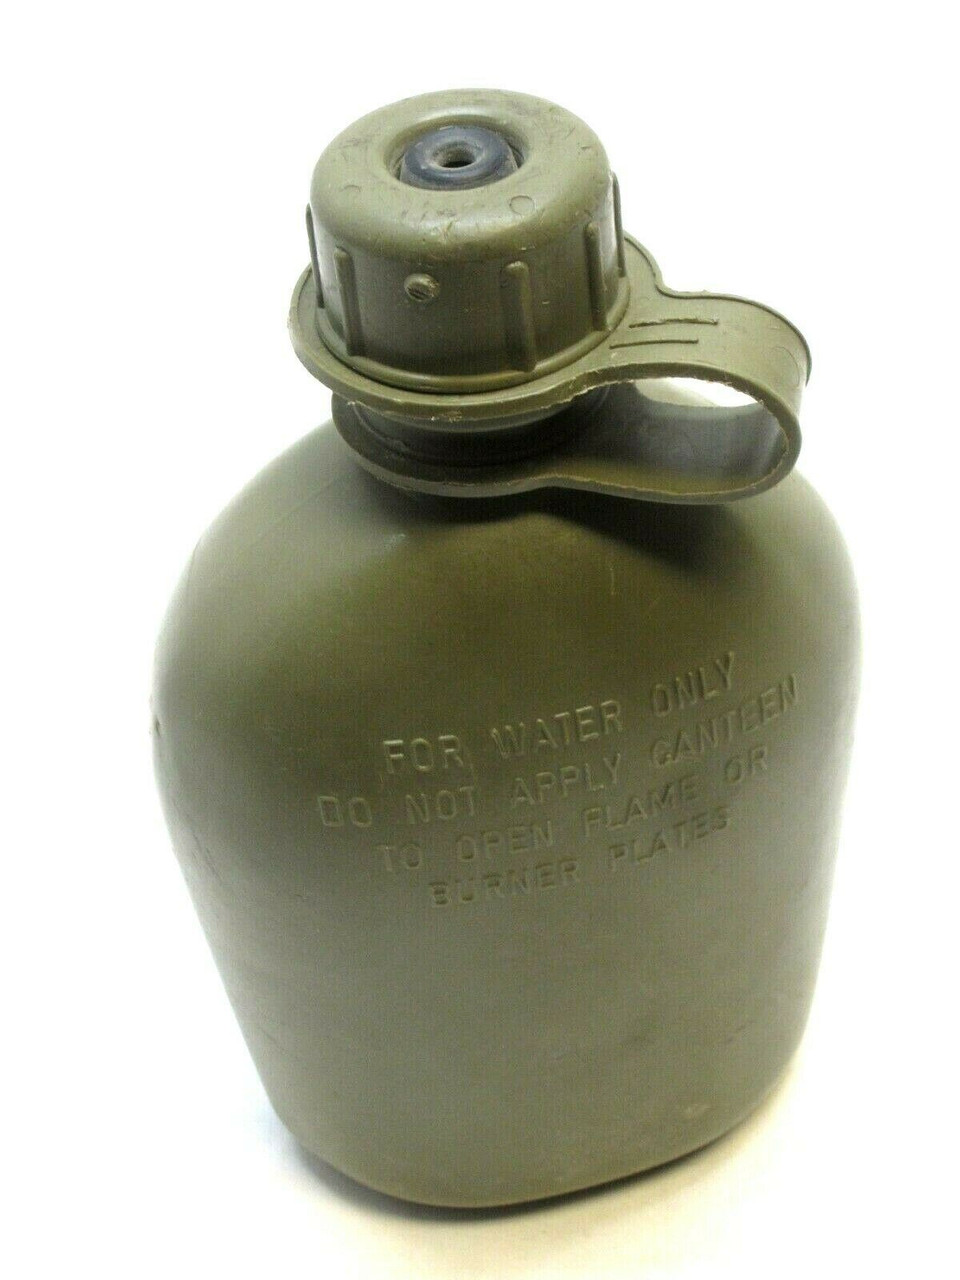 M40 GAS MASK WATER CANTEEN 1 QUART (USED) ARMY SURPLUS DRINK TUBE CAP